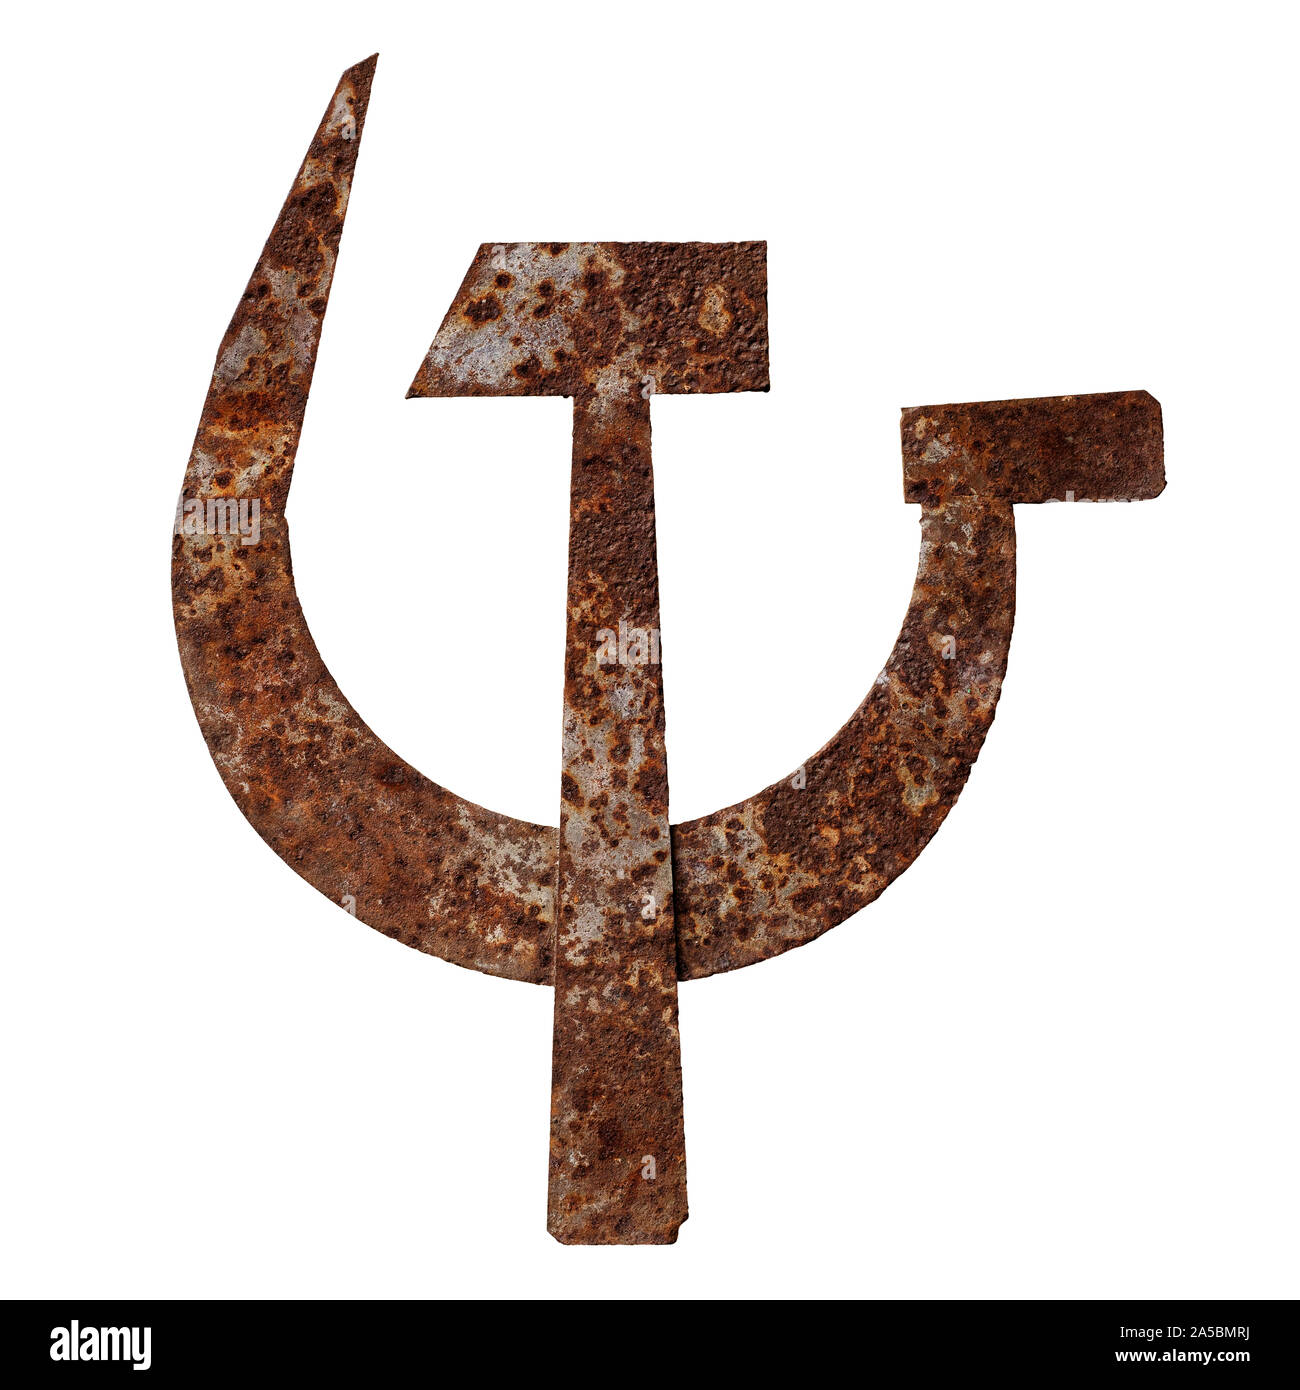 Isolated objects: crossed metal hammer and sickle, old rusty symbol of communism, on white background Stock Photo